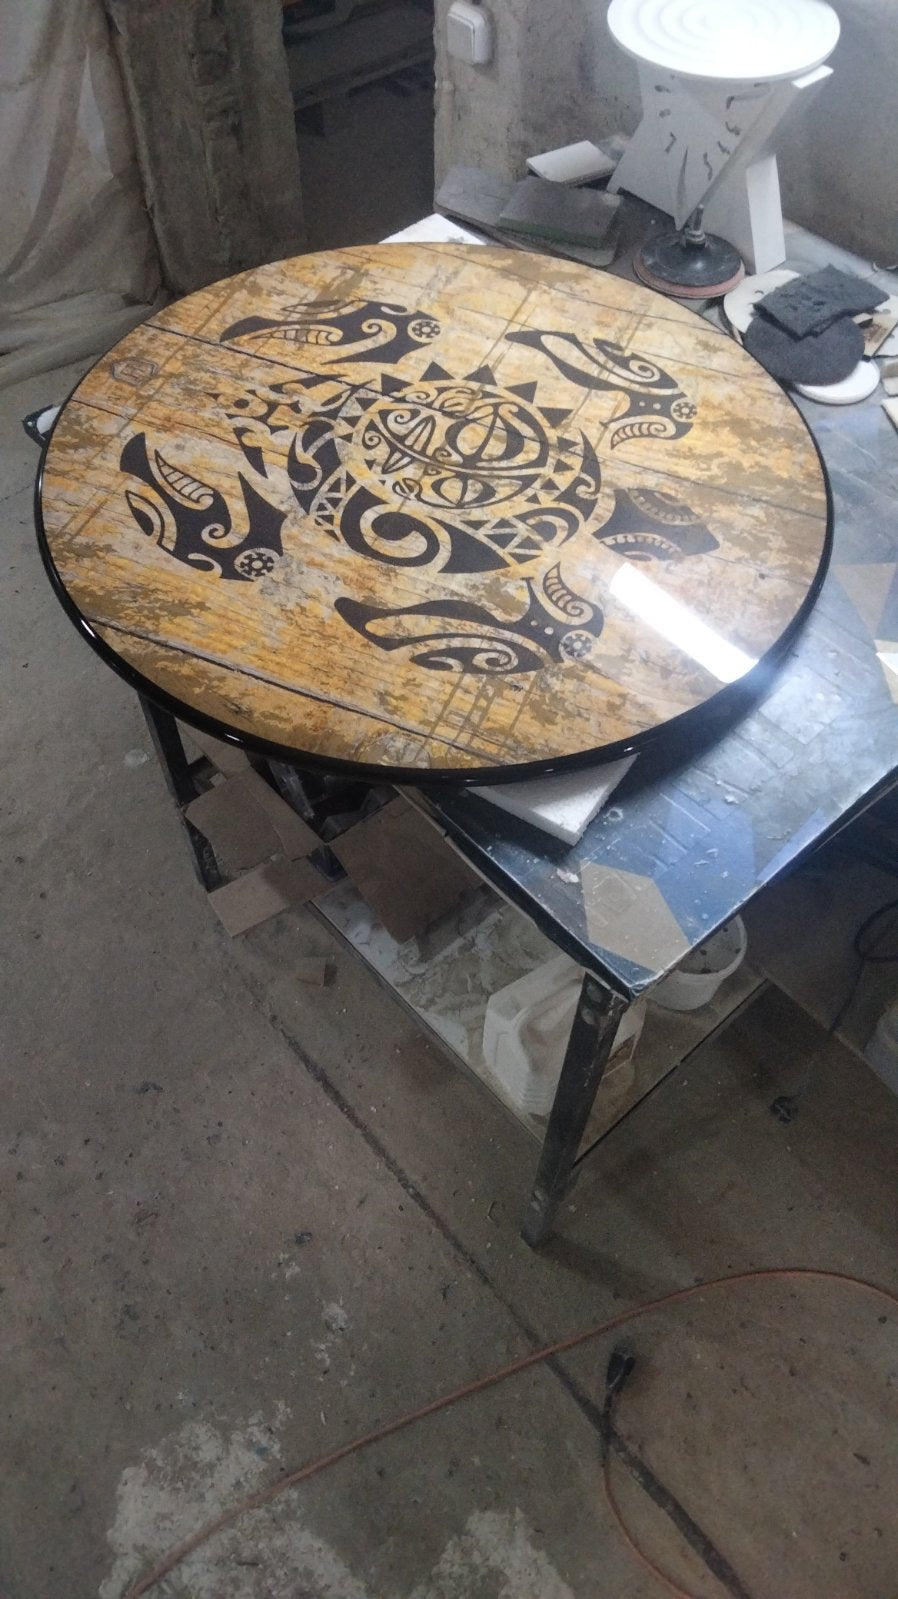 Surfboard Table with Turtle - Surfing gift in Bar Decor